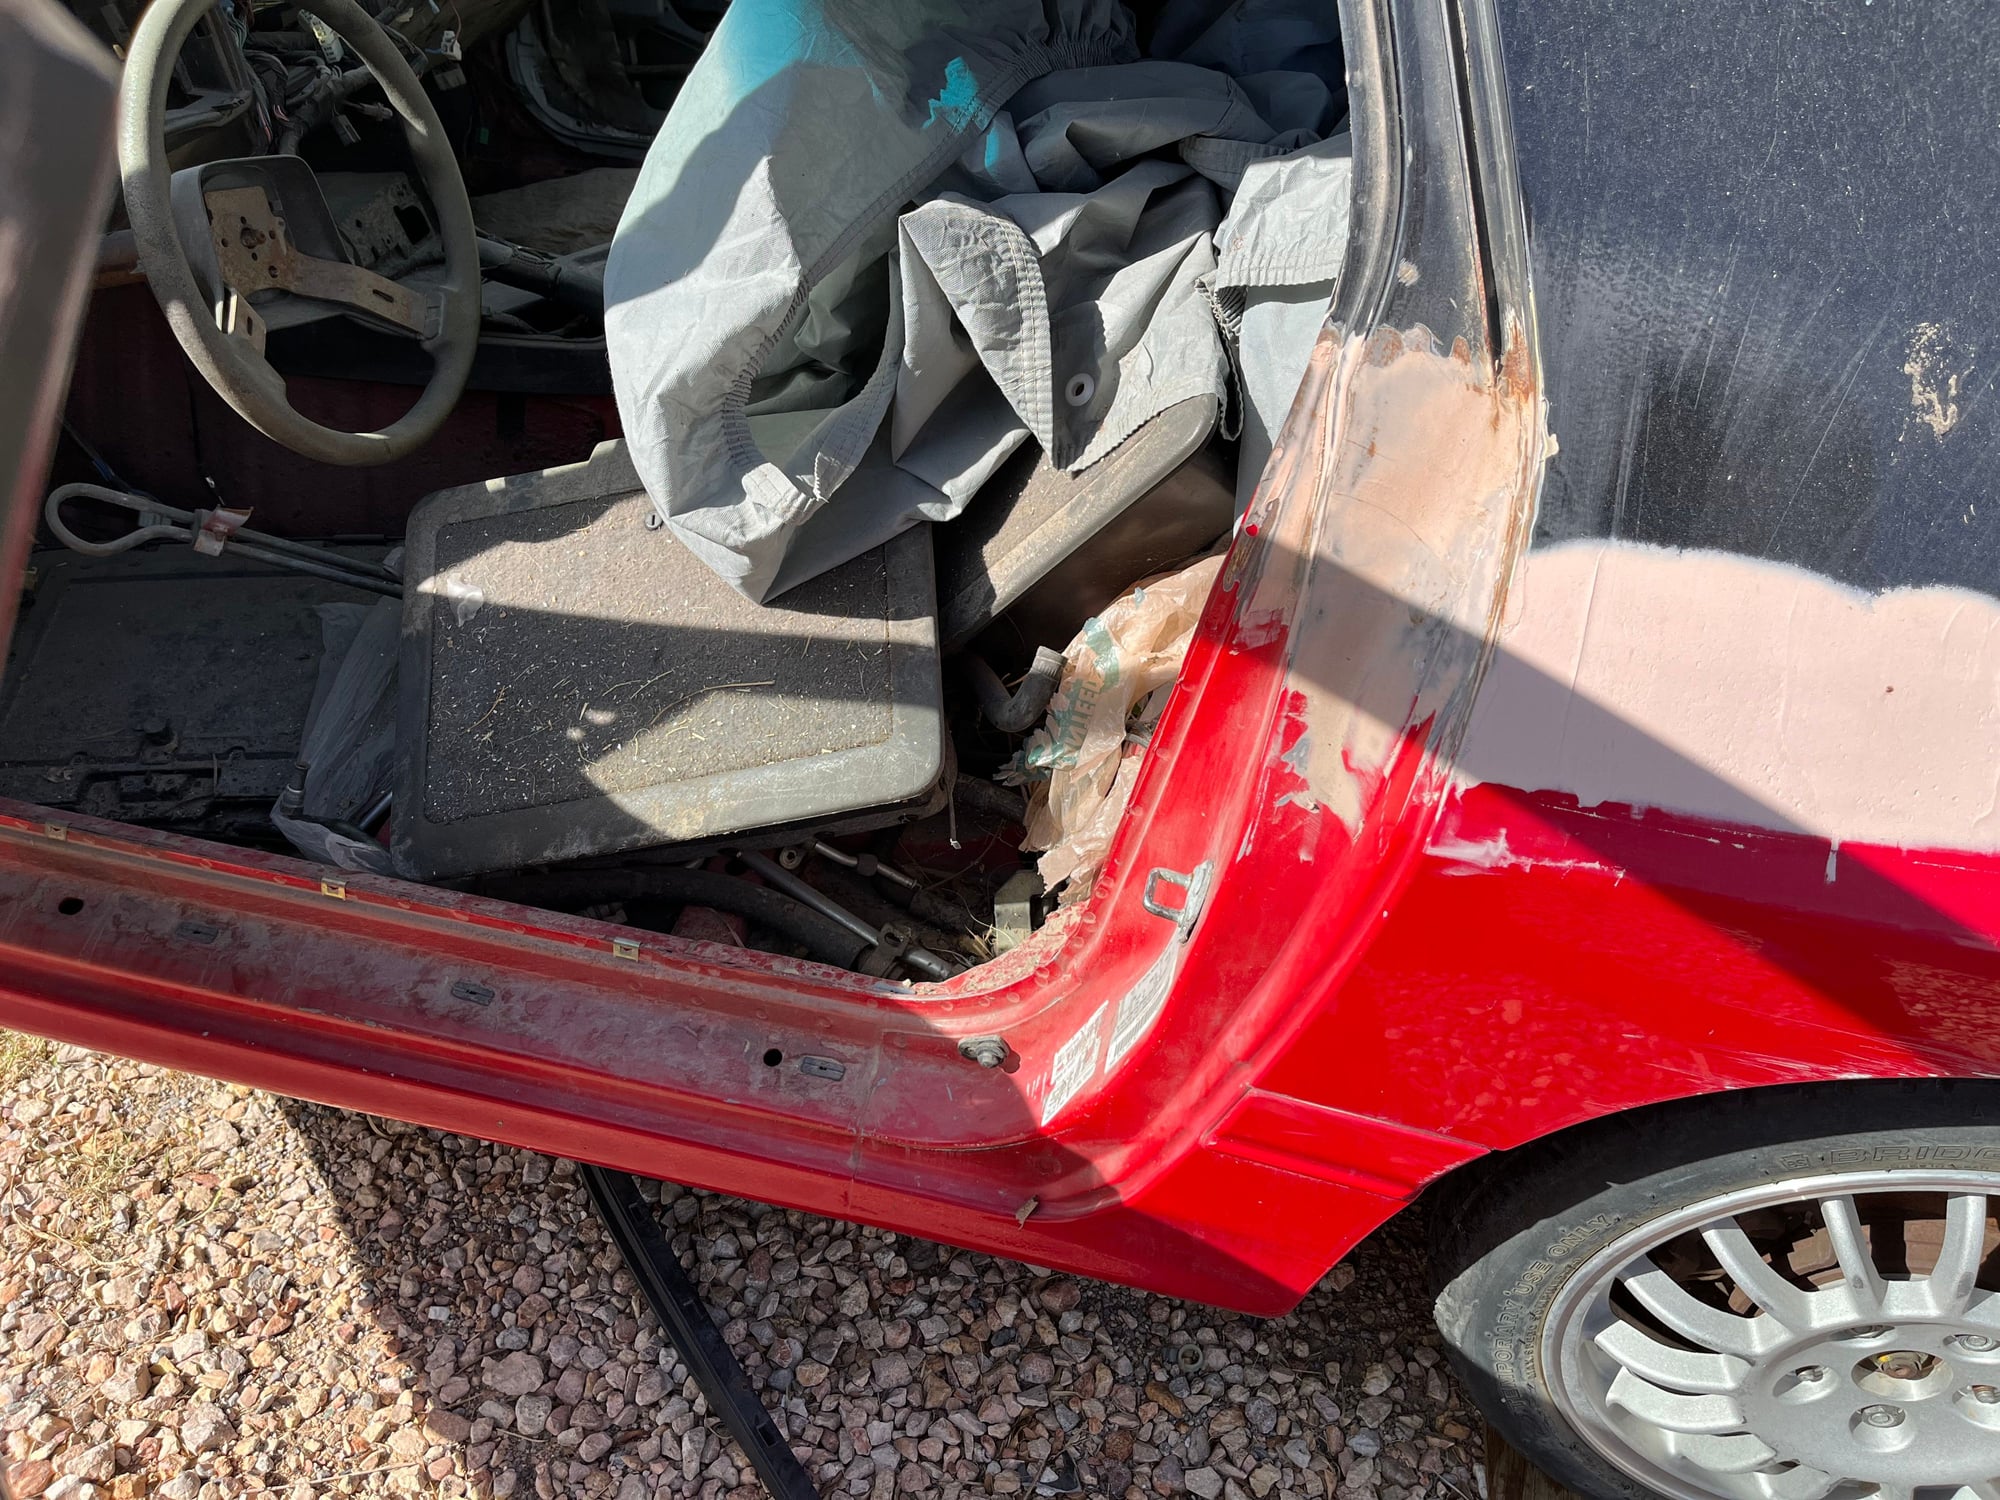 1990 Mazda RX-7 - Well im not sure what it is we call it A COUPE /VERT or a notchback - Used - Las Vegas, NV 89108, United States